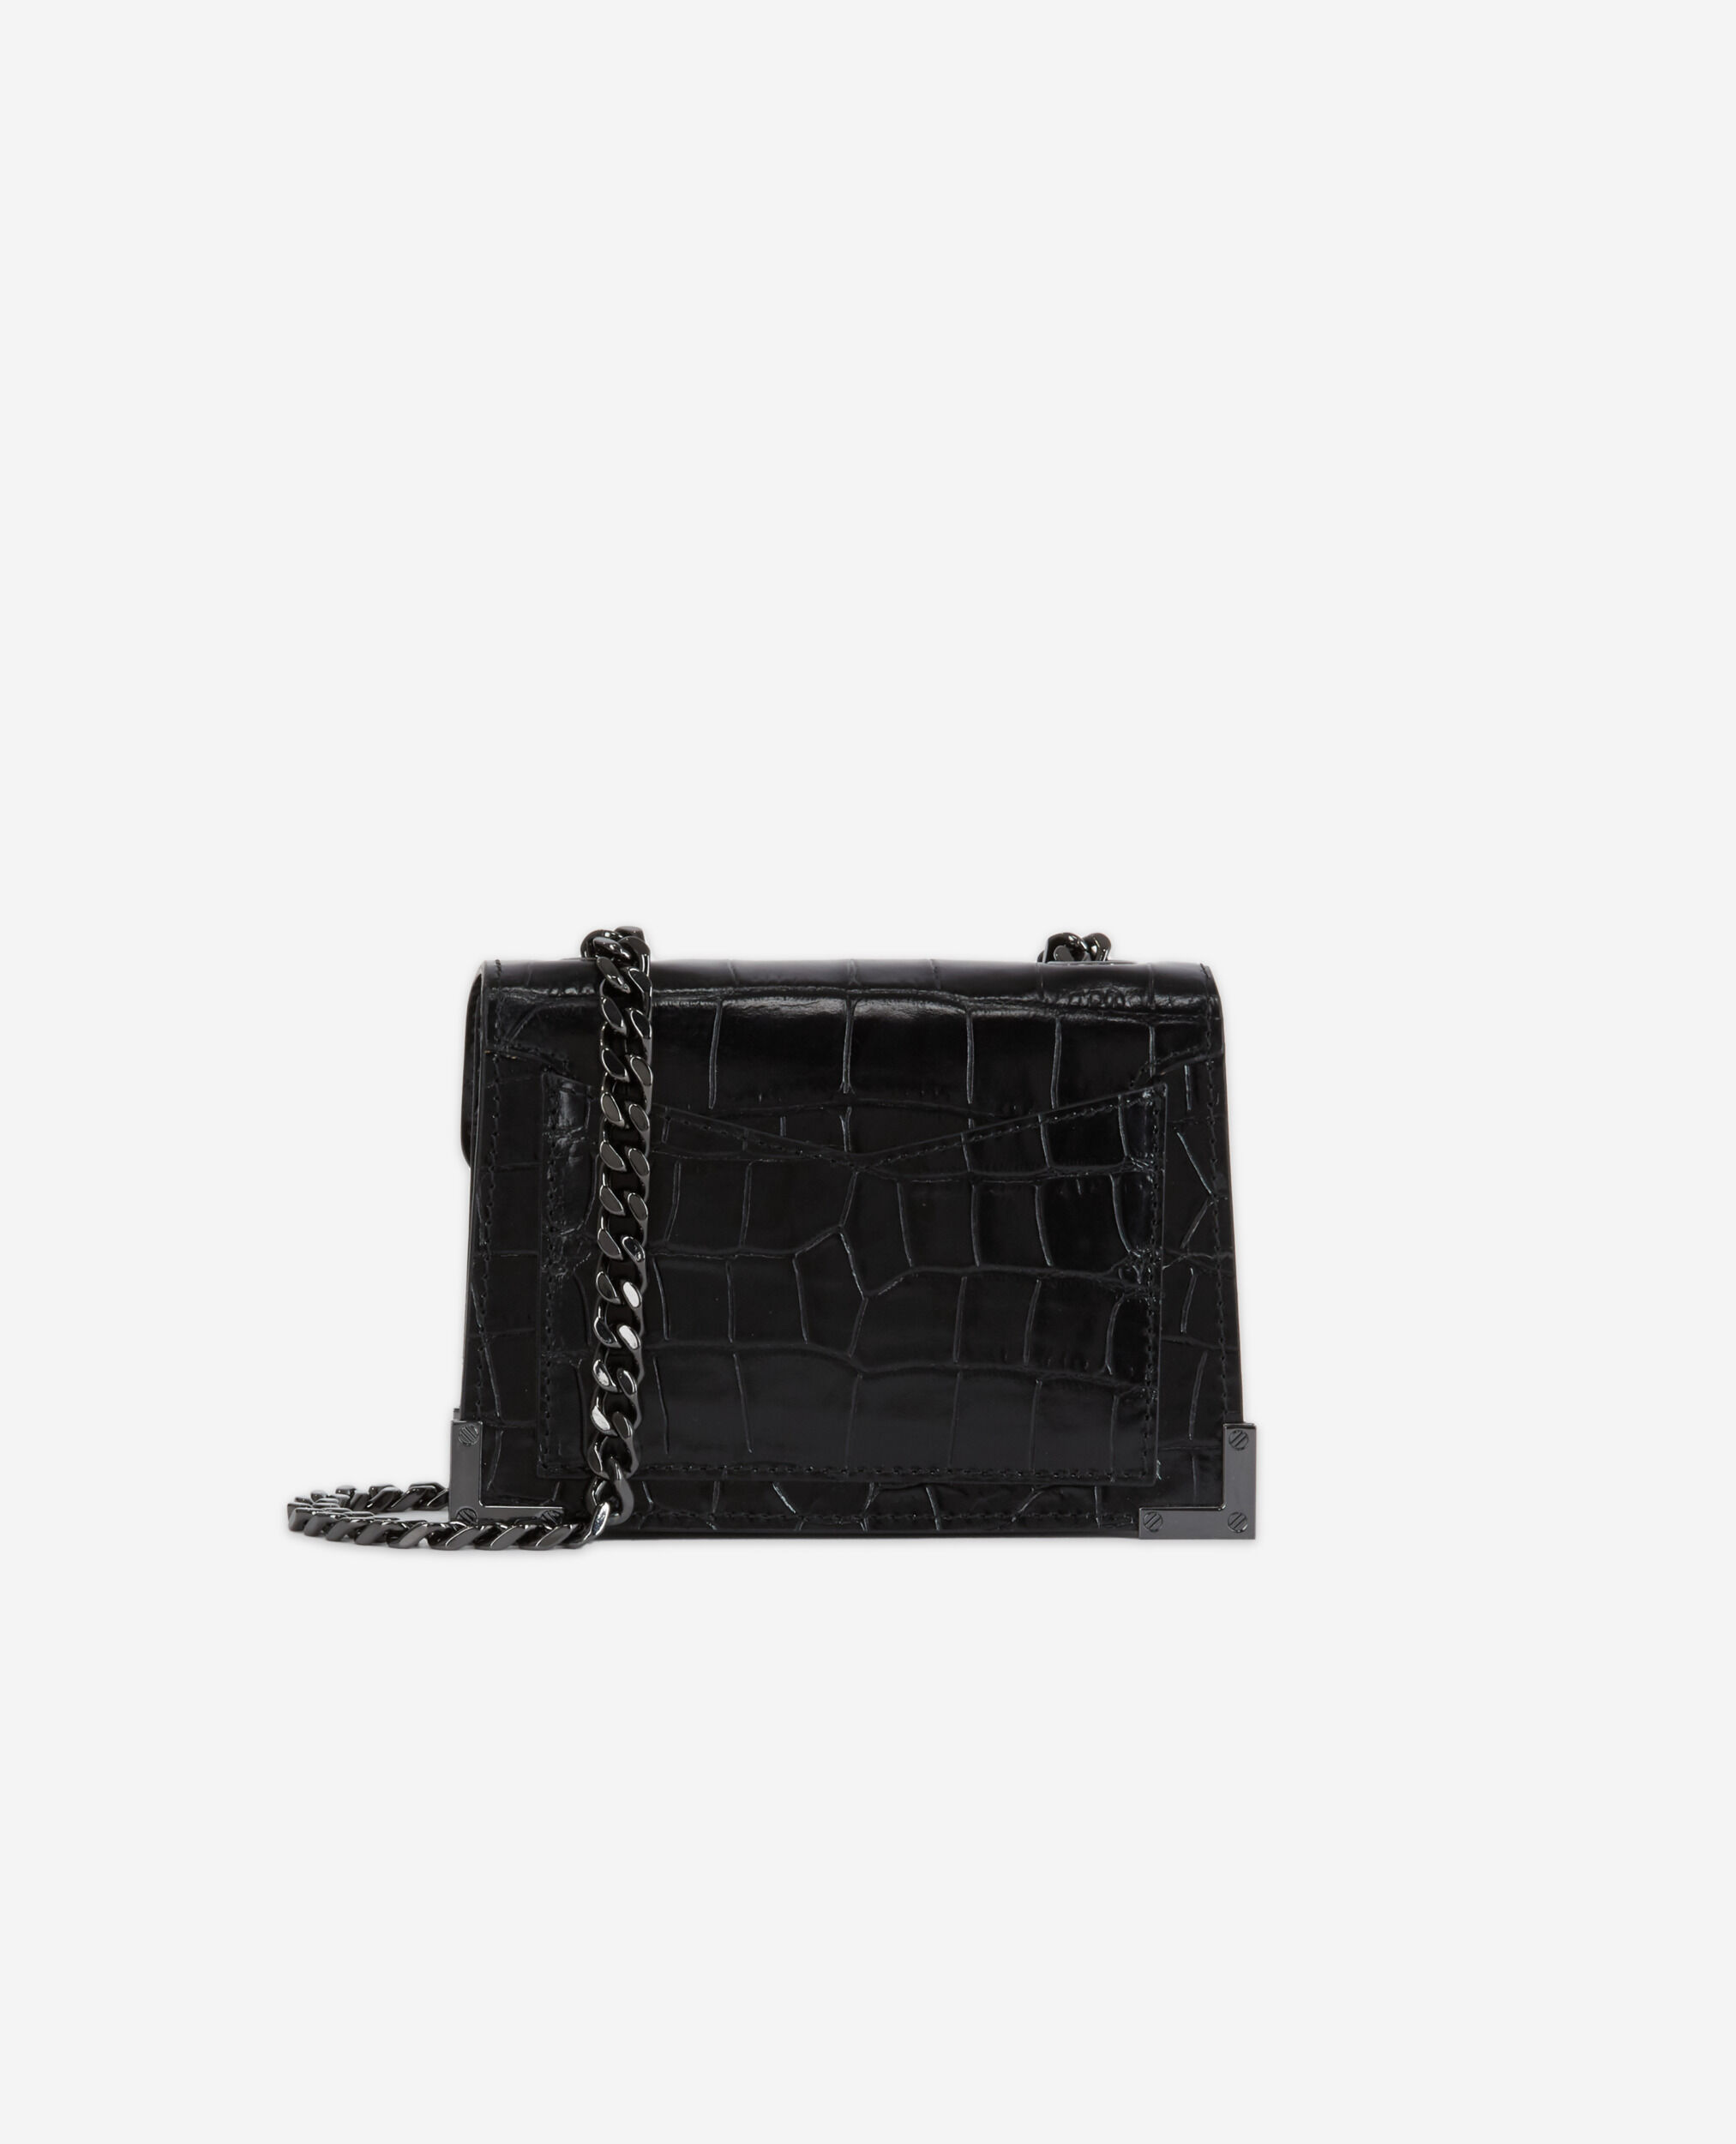 Sac Emily small Black Edition Chaine , BLACK, hi-res image number null